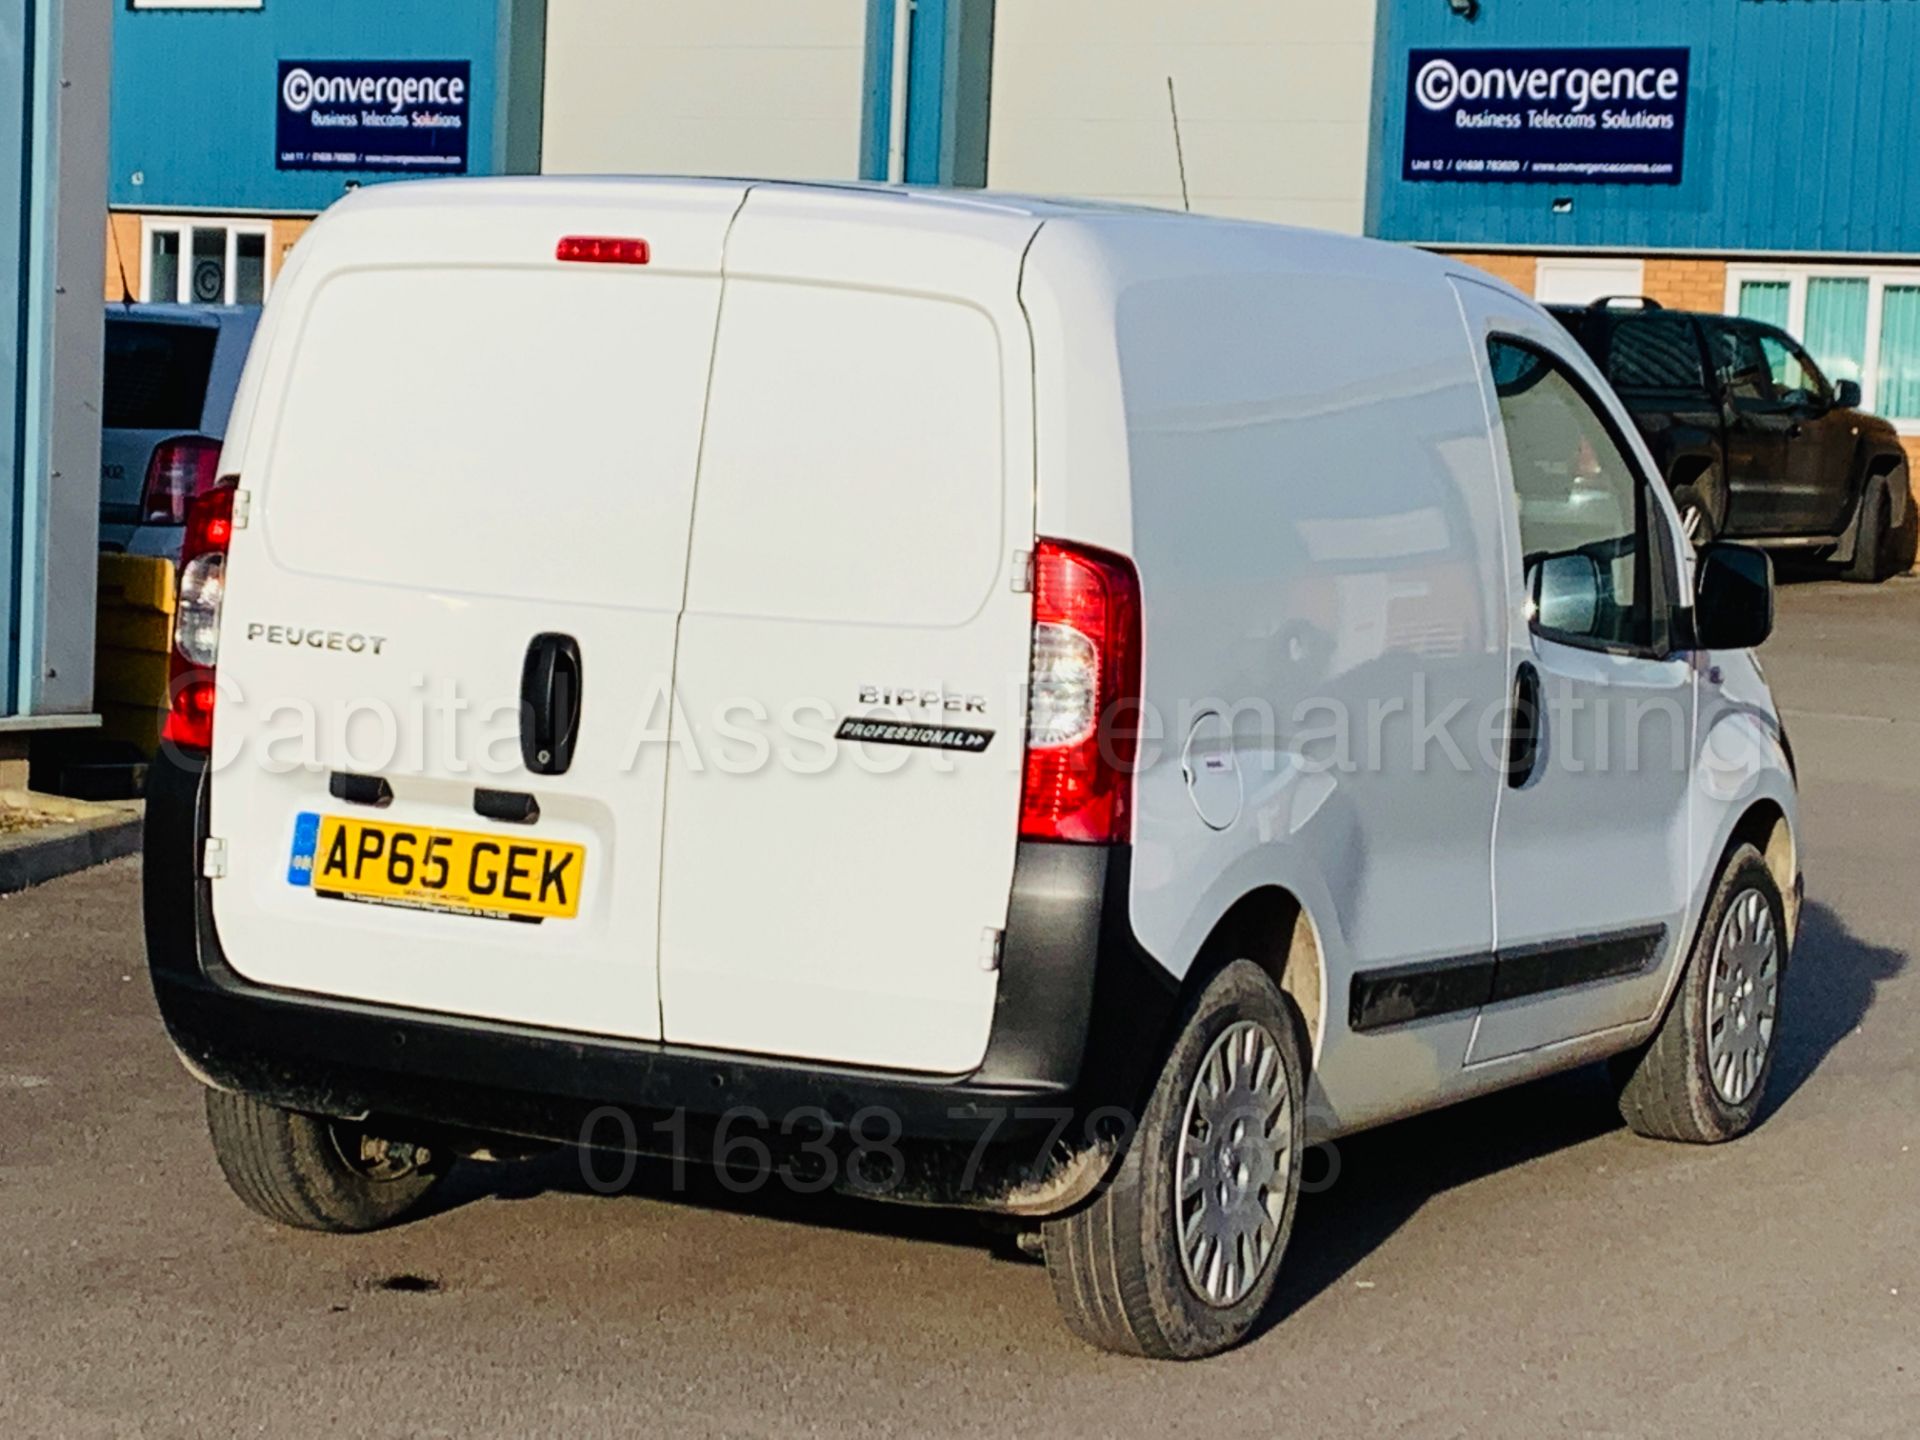 (On Sale) PEUGEOT BIPPER *PROFESSIONAL* LCV - PANEL VAN (65 REG) 'HDI - 5 SPEED' (1 OWNER) *AIR CON* - Image 10 of 36